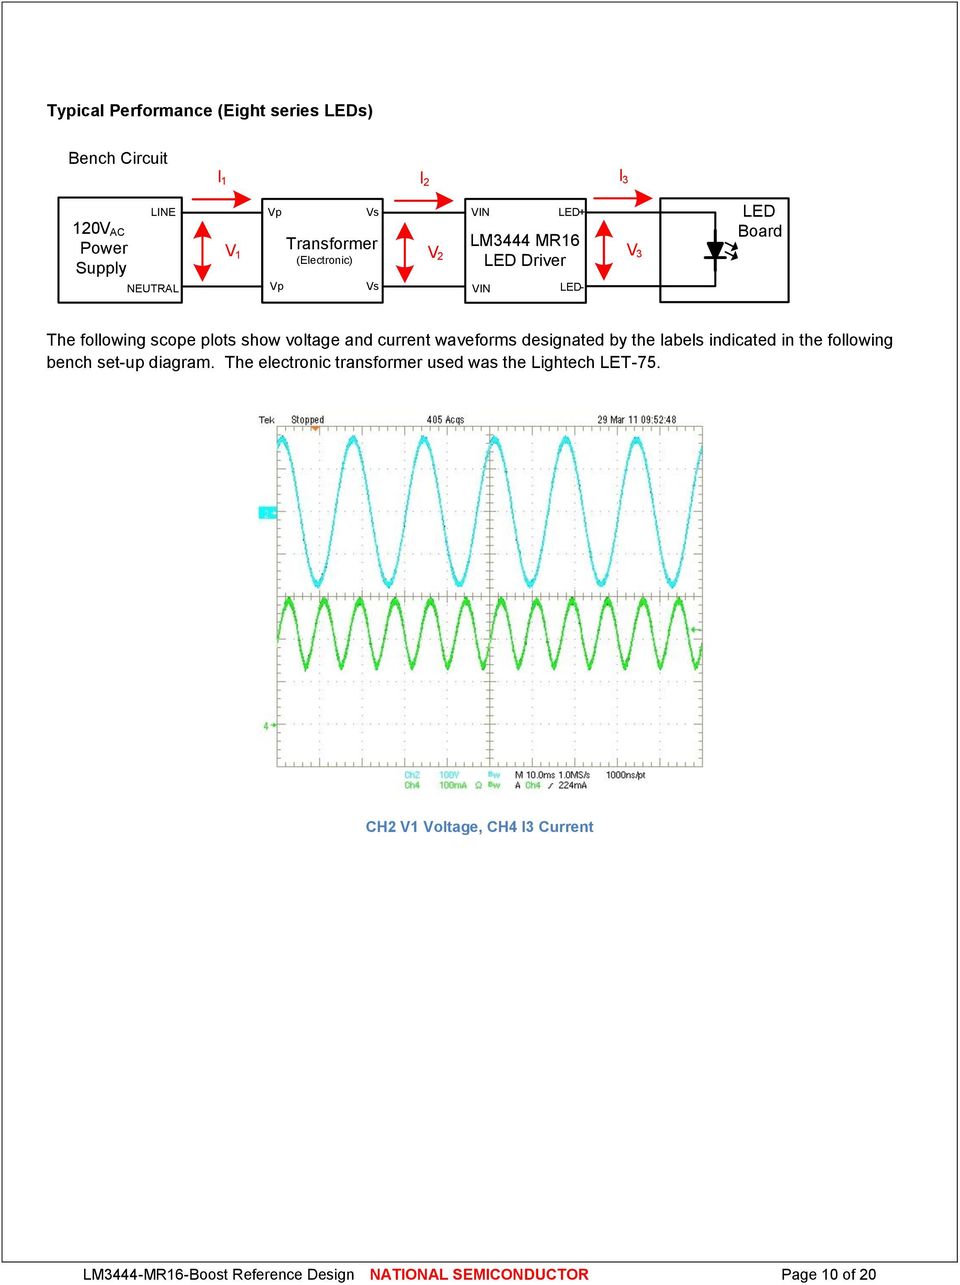 voltage and current waveforms designated by the labels indicated in the following bench set-up diagram.